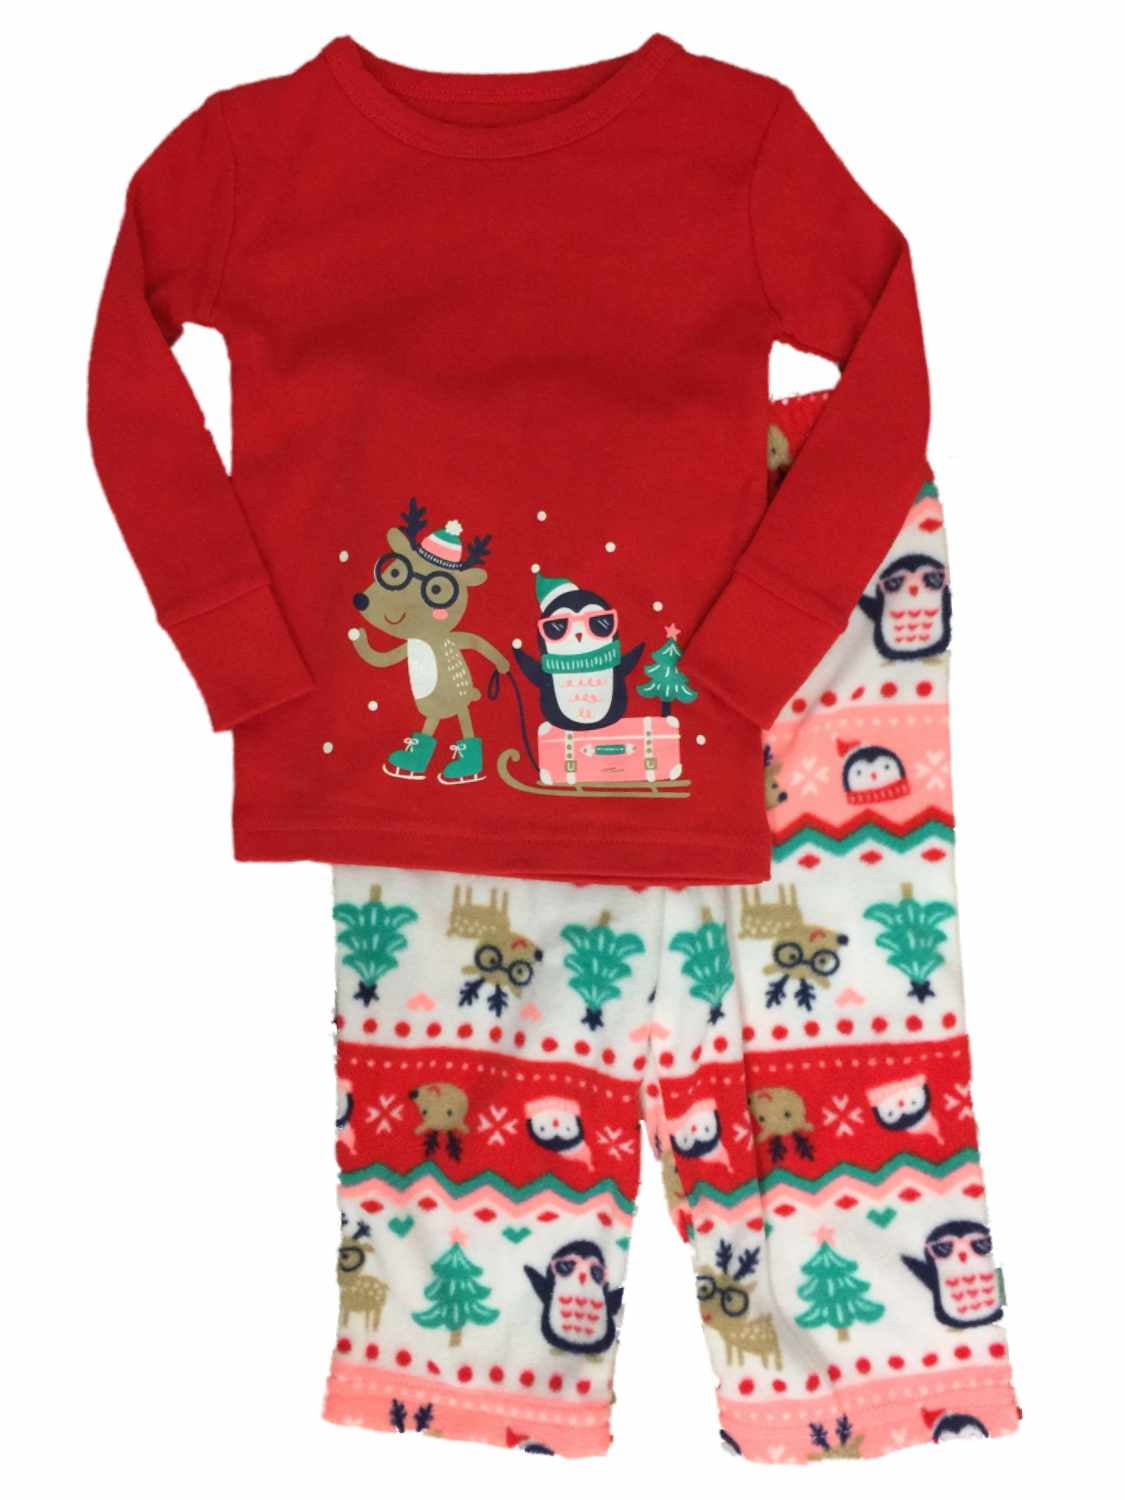 The Children's Place Toddler Girls' Christmas Reindeer Print Stretchie Pajama, 